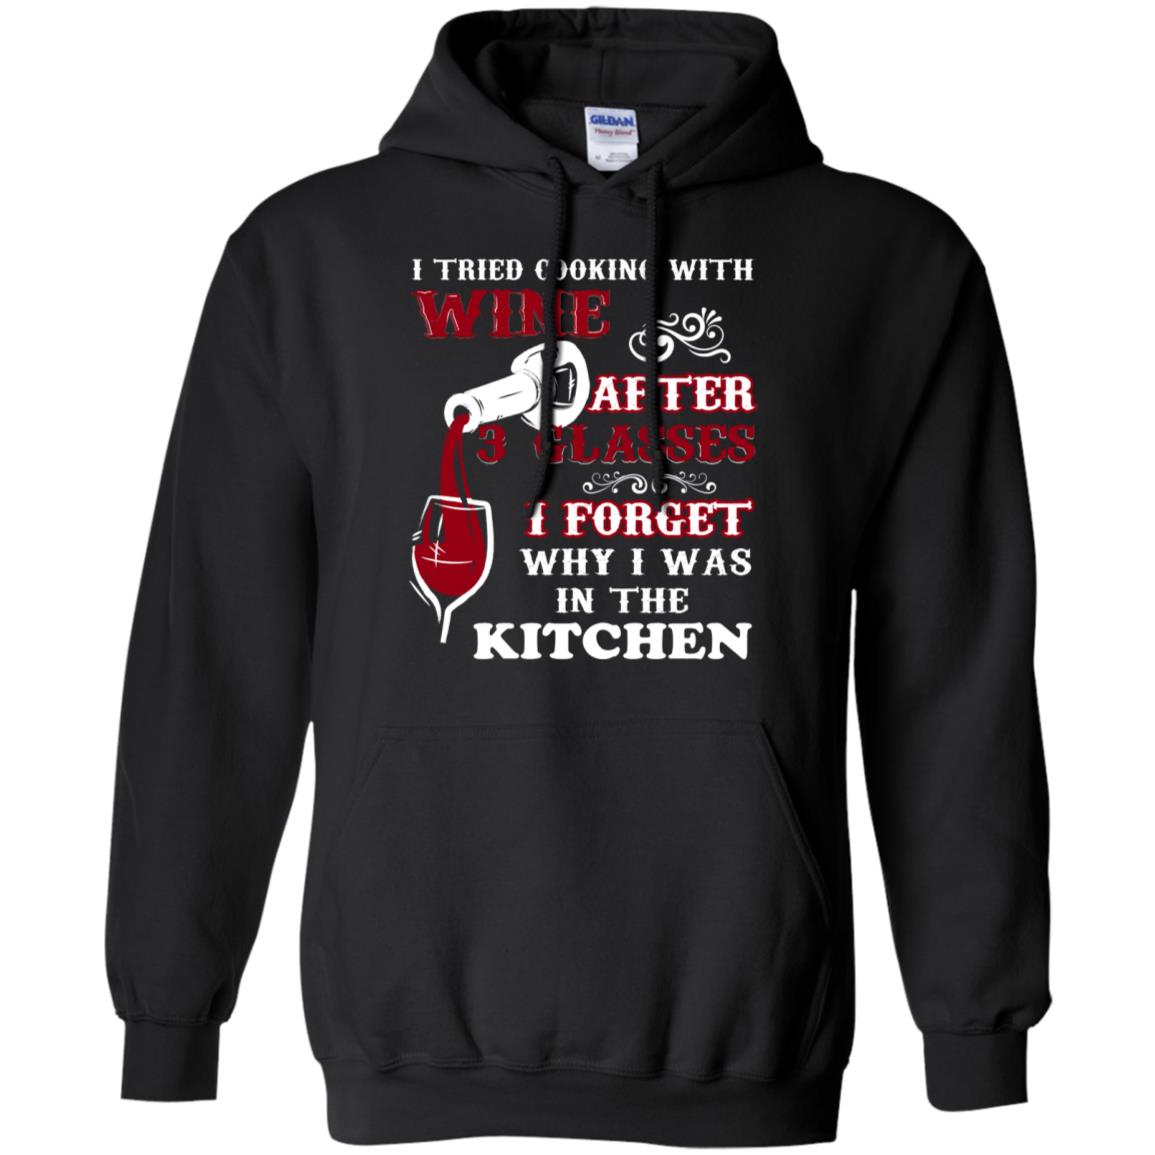 I Tried Cooking With Wine After 3 Glasses I Forget Why I Was In The Kitchen ShirtG185 Gildan Pullover Hoodie 8 oz.